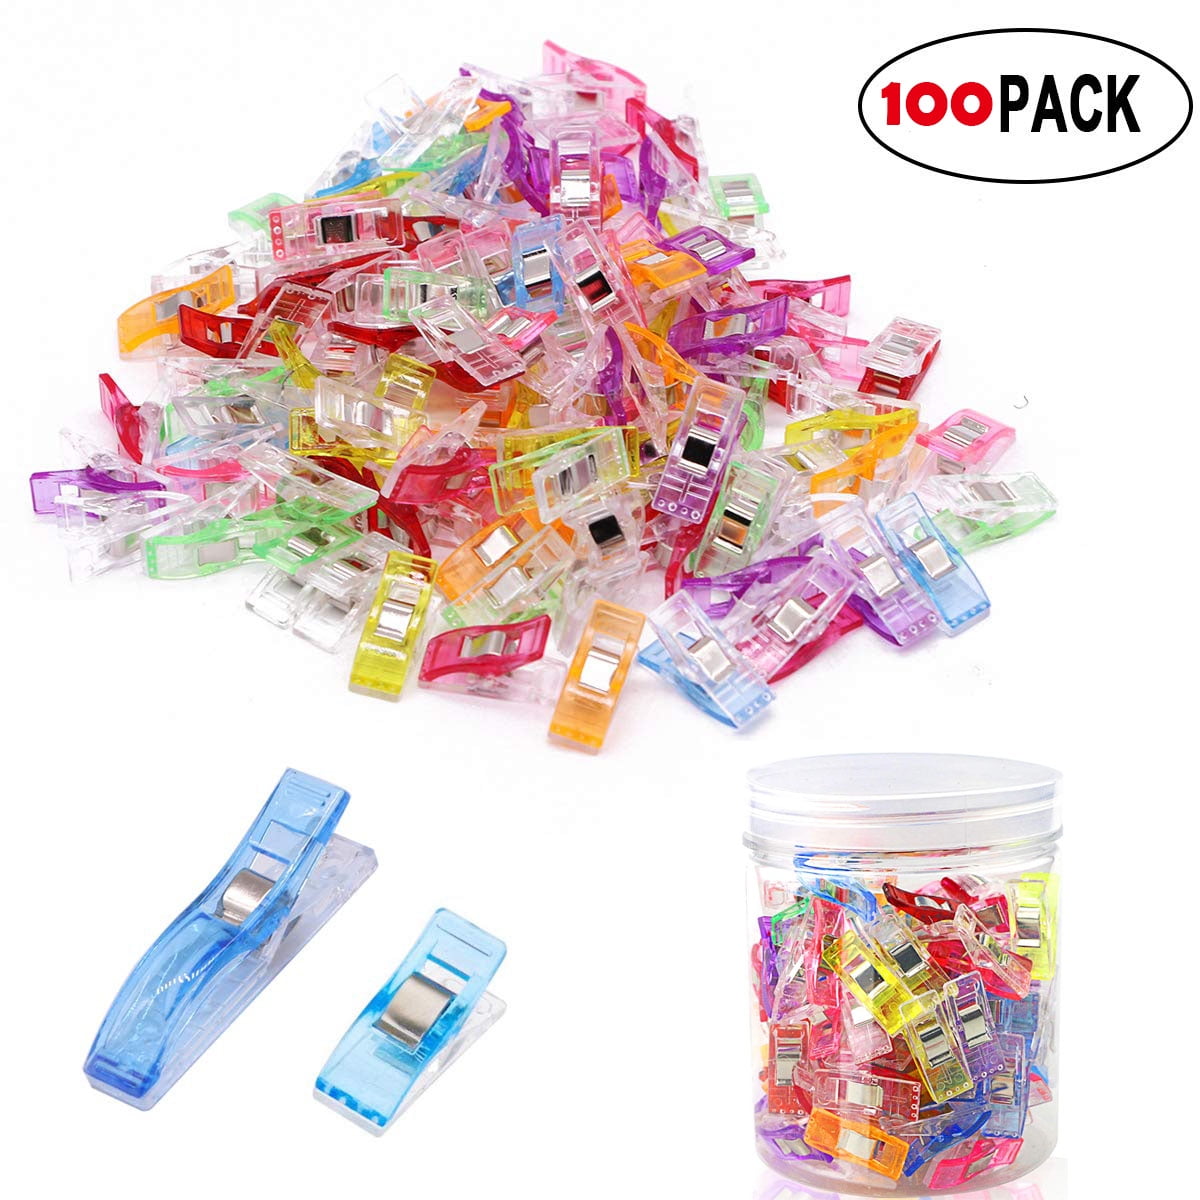 50/100Pcs Plastic Holding Clip Set Crafts Quilting Sewing Knitting Crochet DIY